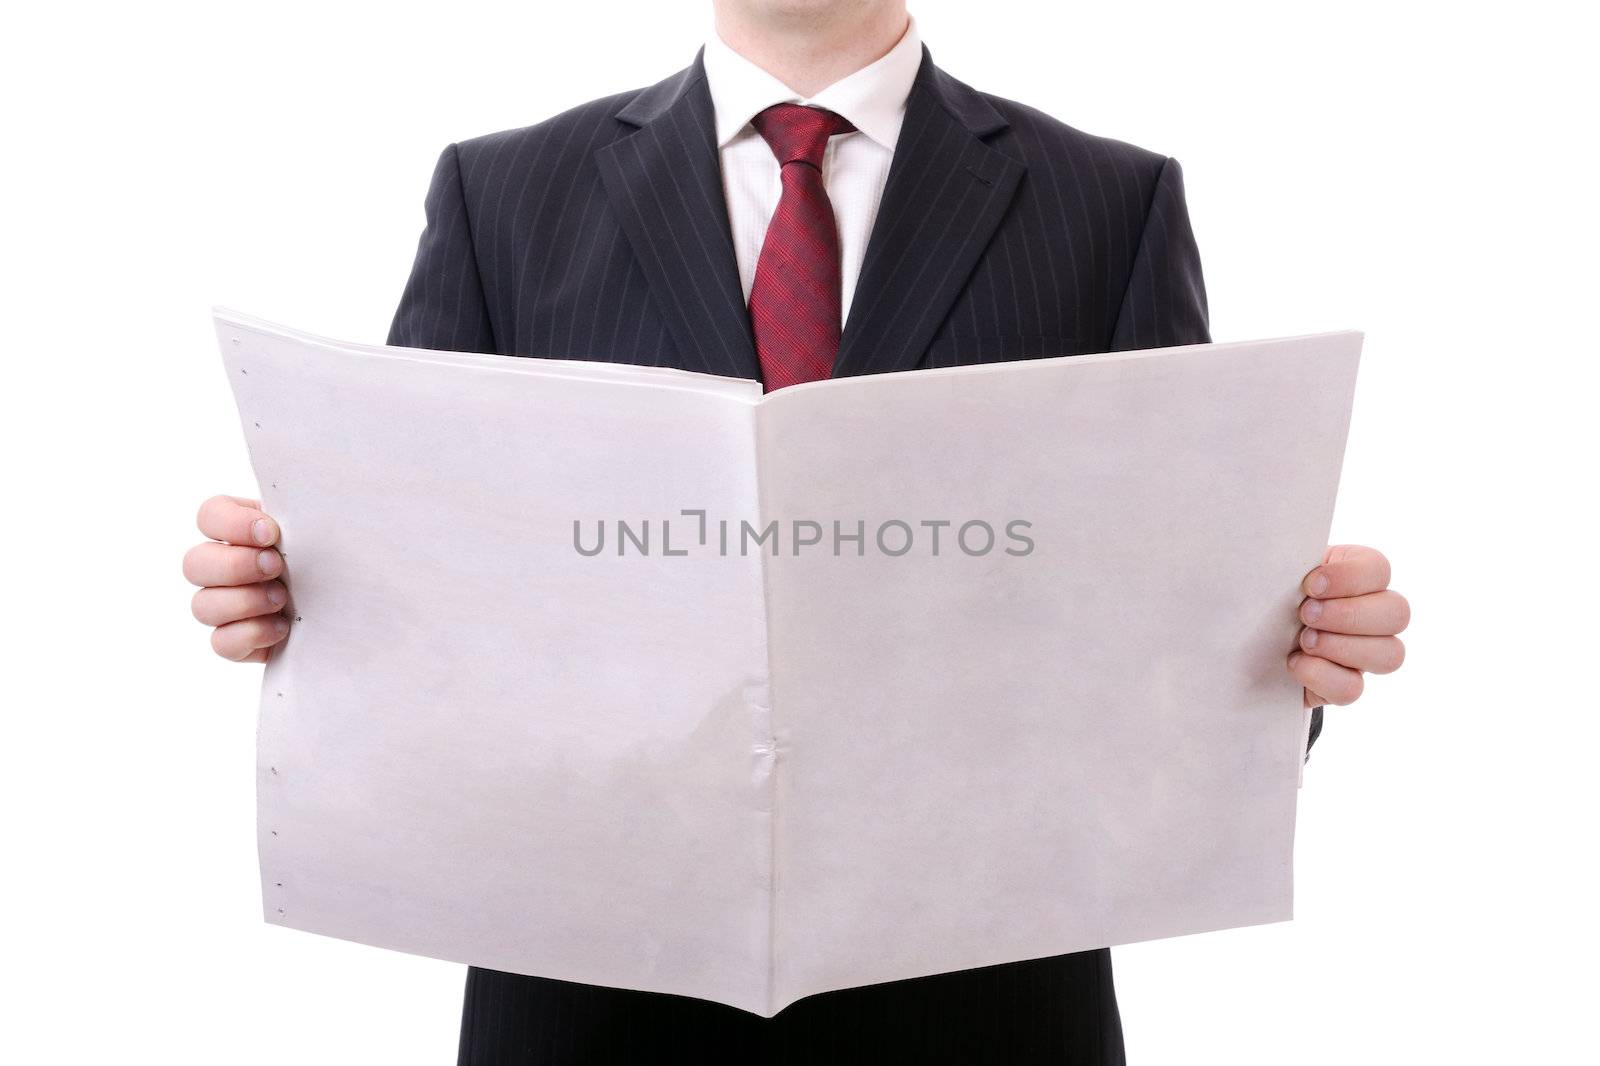 businessman holding a blank news paper isolated on white